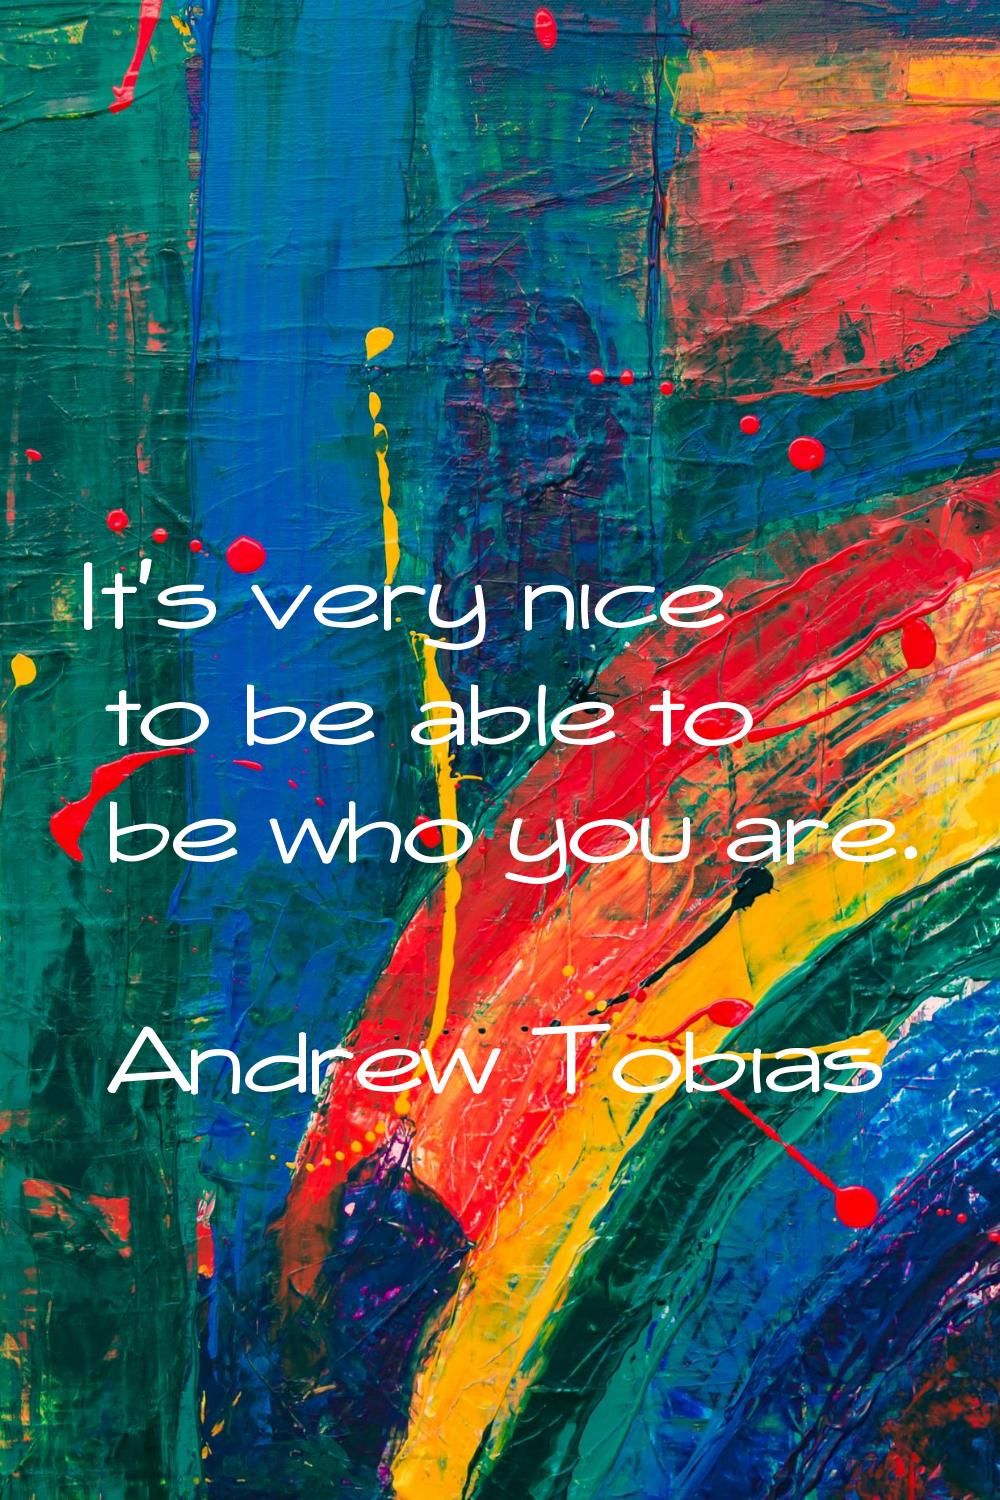 It's very nice to be able to be who you are.